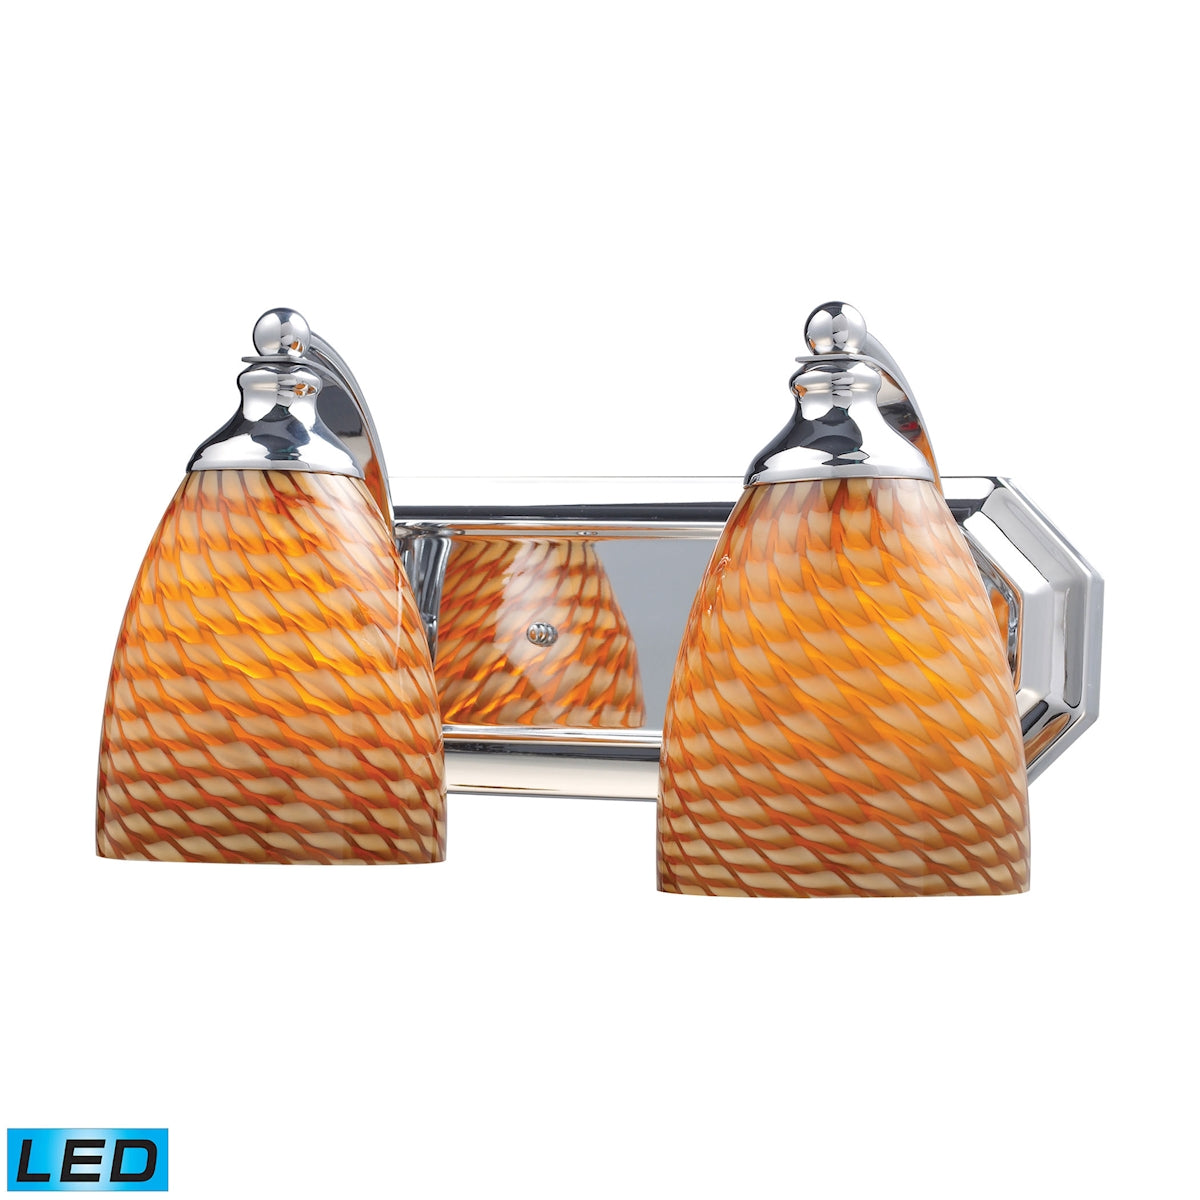 ELK Lighting 570-2C-C-LED Mix and Match Vanity 2-Light Wall Lamp in Chrome with Cocoa Glass - Includes LED Bulbs